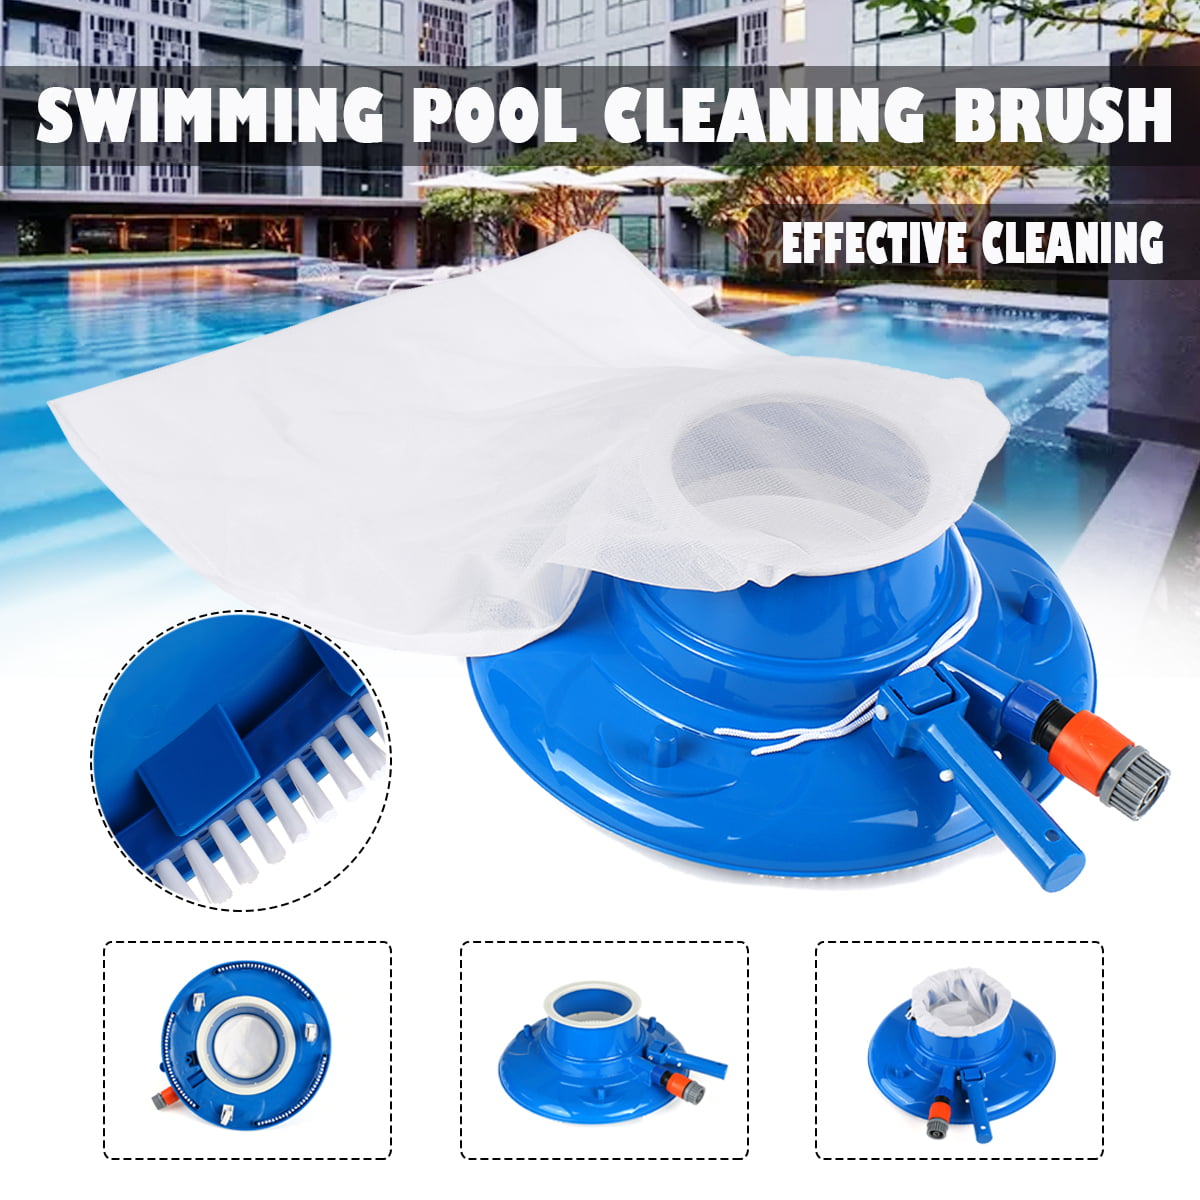 Heavy Duty Pool Spa Leaf Eater/gulper Vacuum Cleaner with Brush, Bag, Wheels, Suitable for any standard telescopic rod